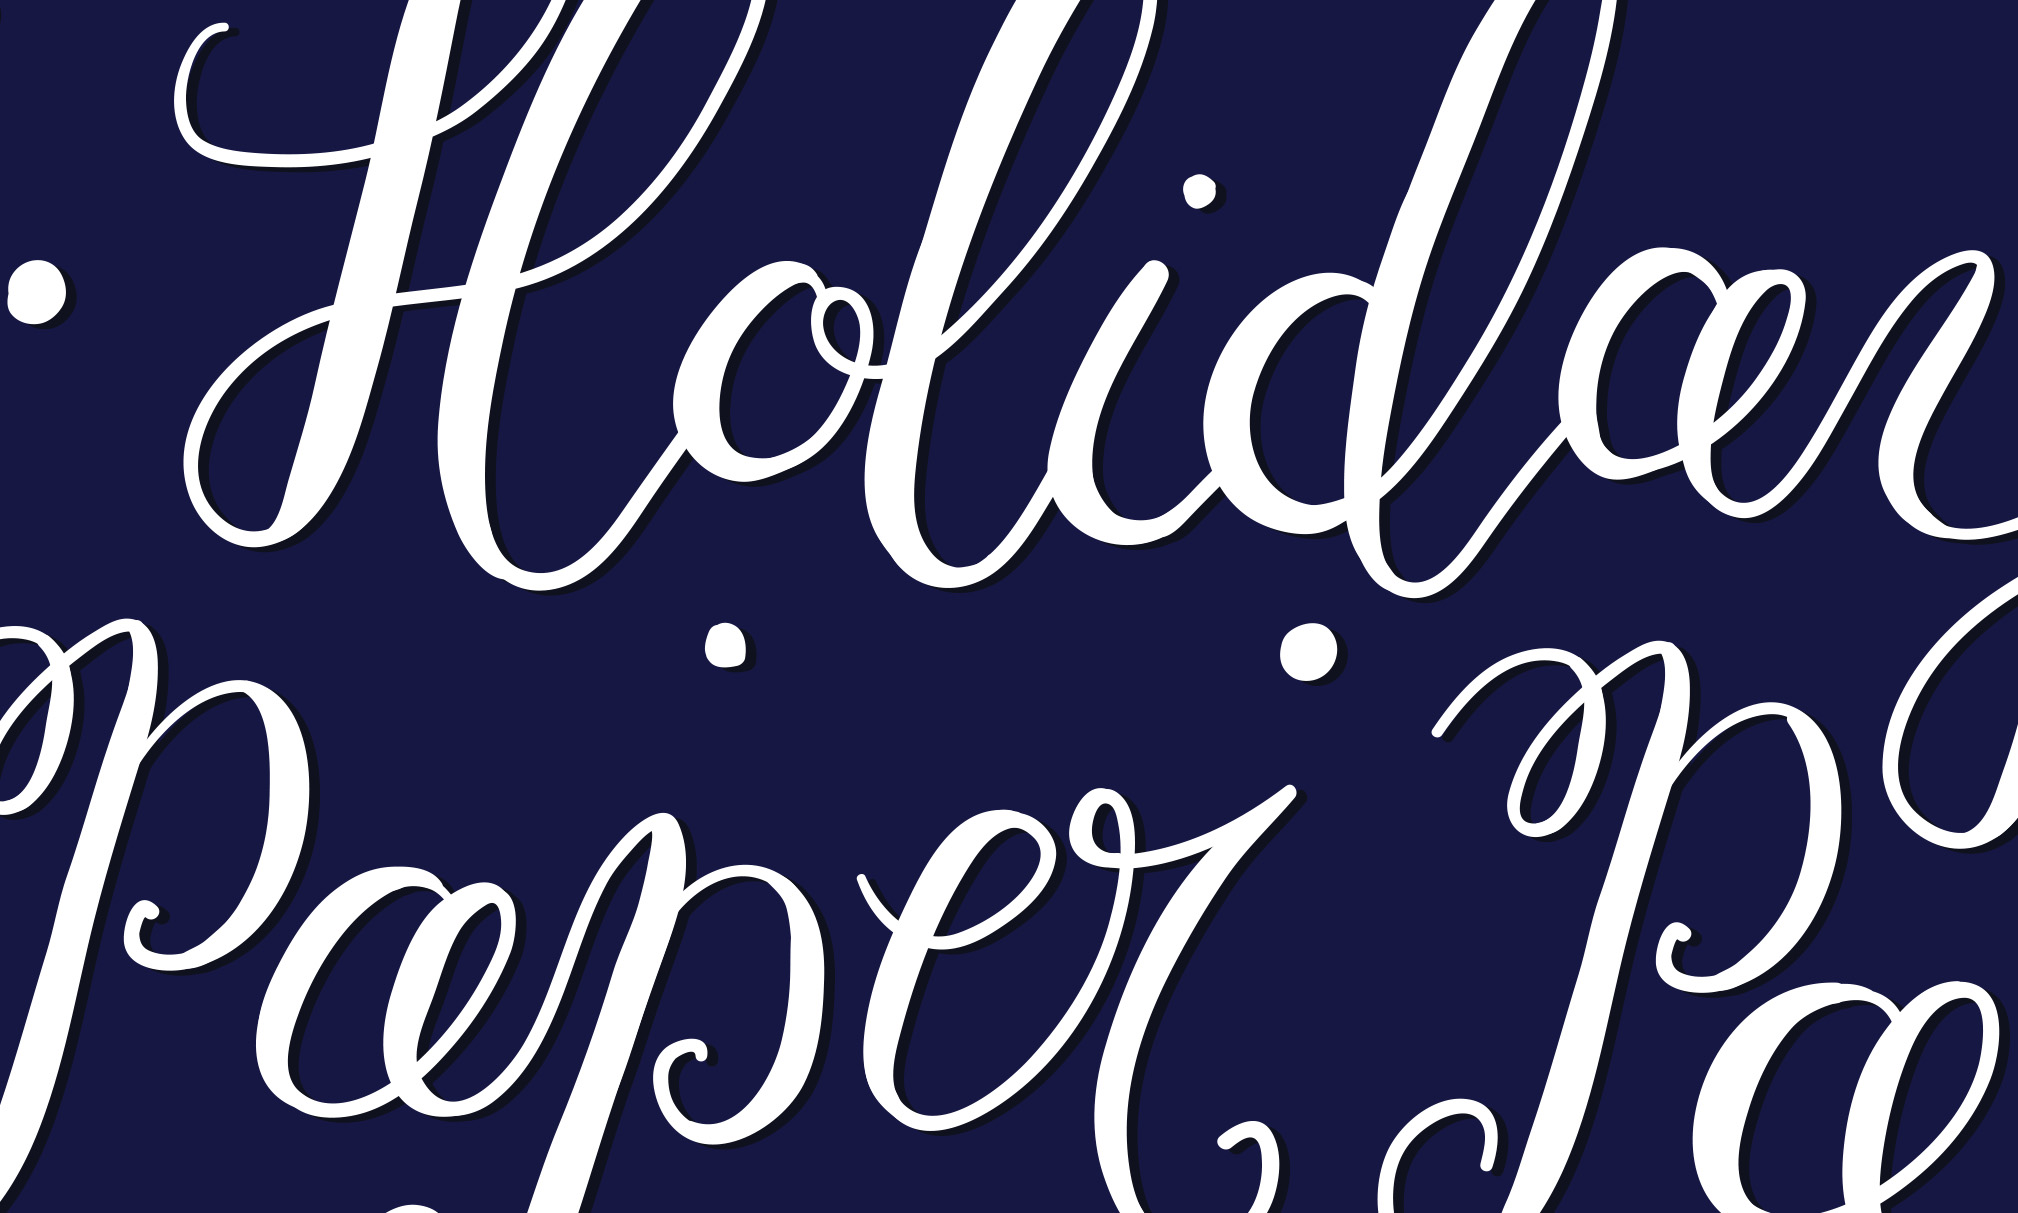 website 2 Holiday Paper Party3 - navy2.jpg